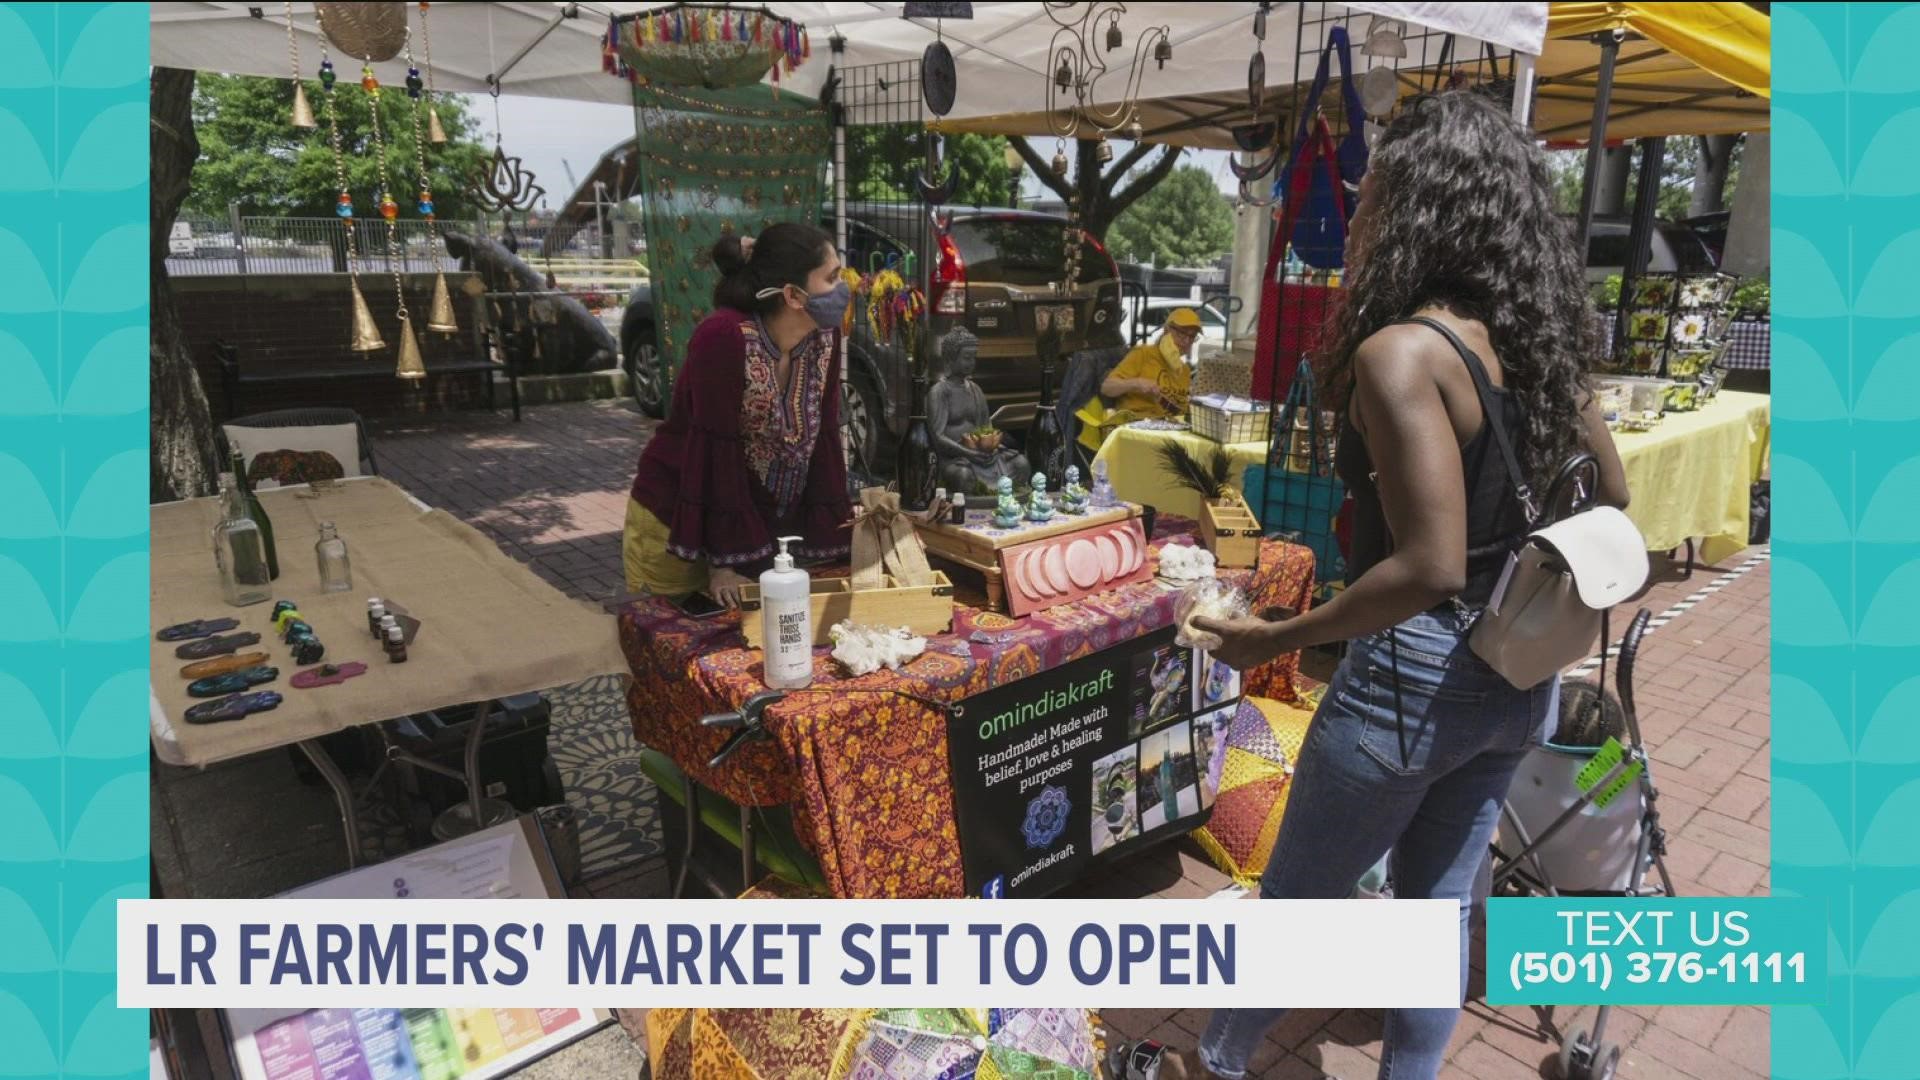 The Little Rock Farmers' Market returns to the River Market pavilions for its 48th season this weekend.